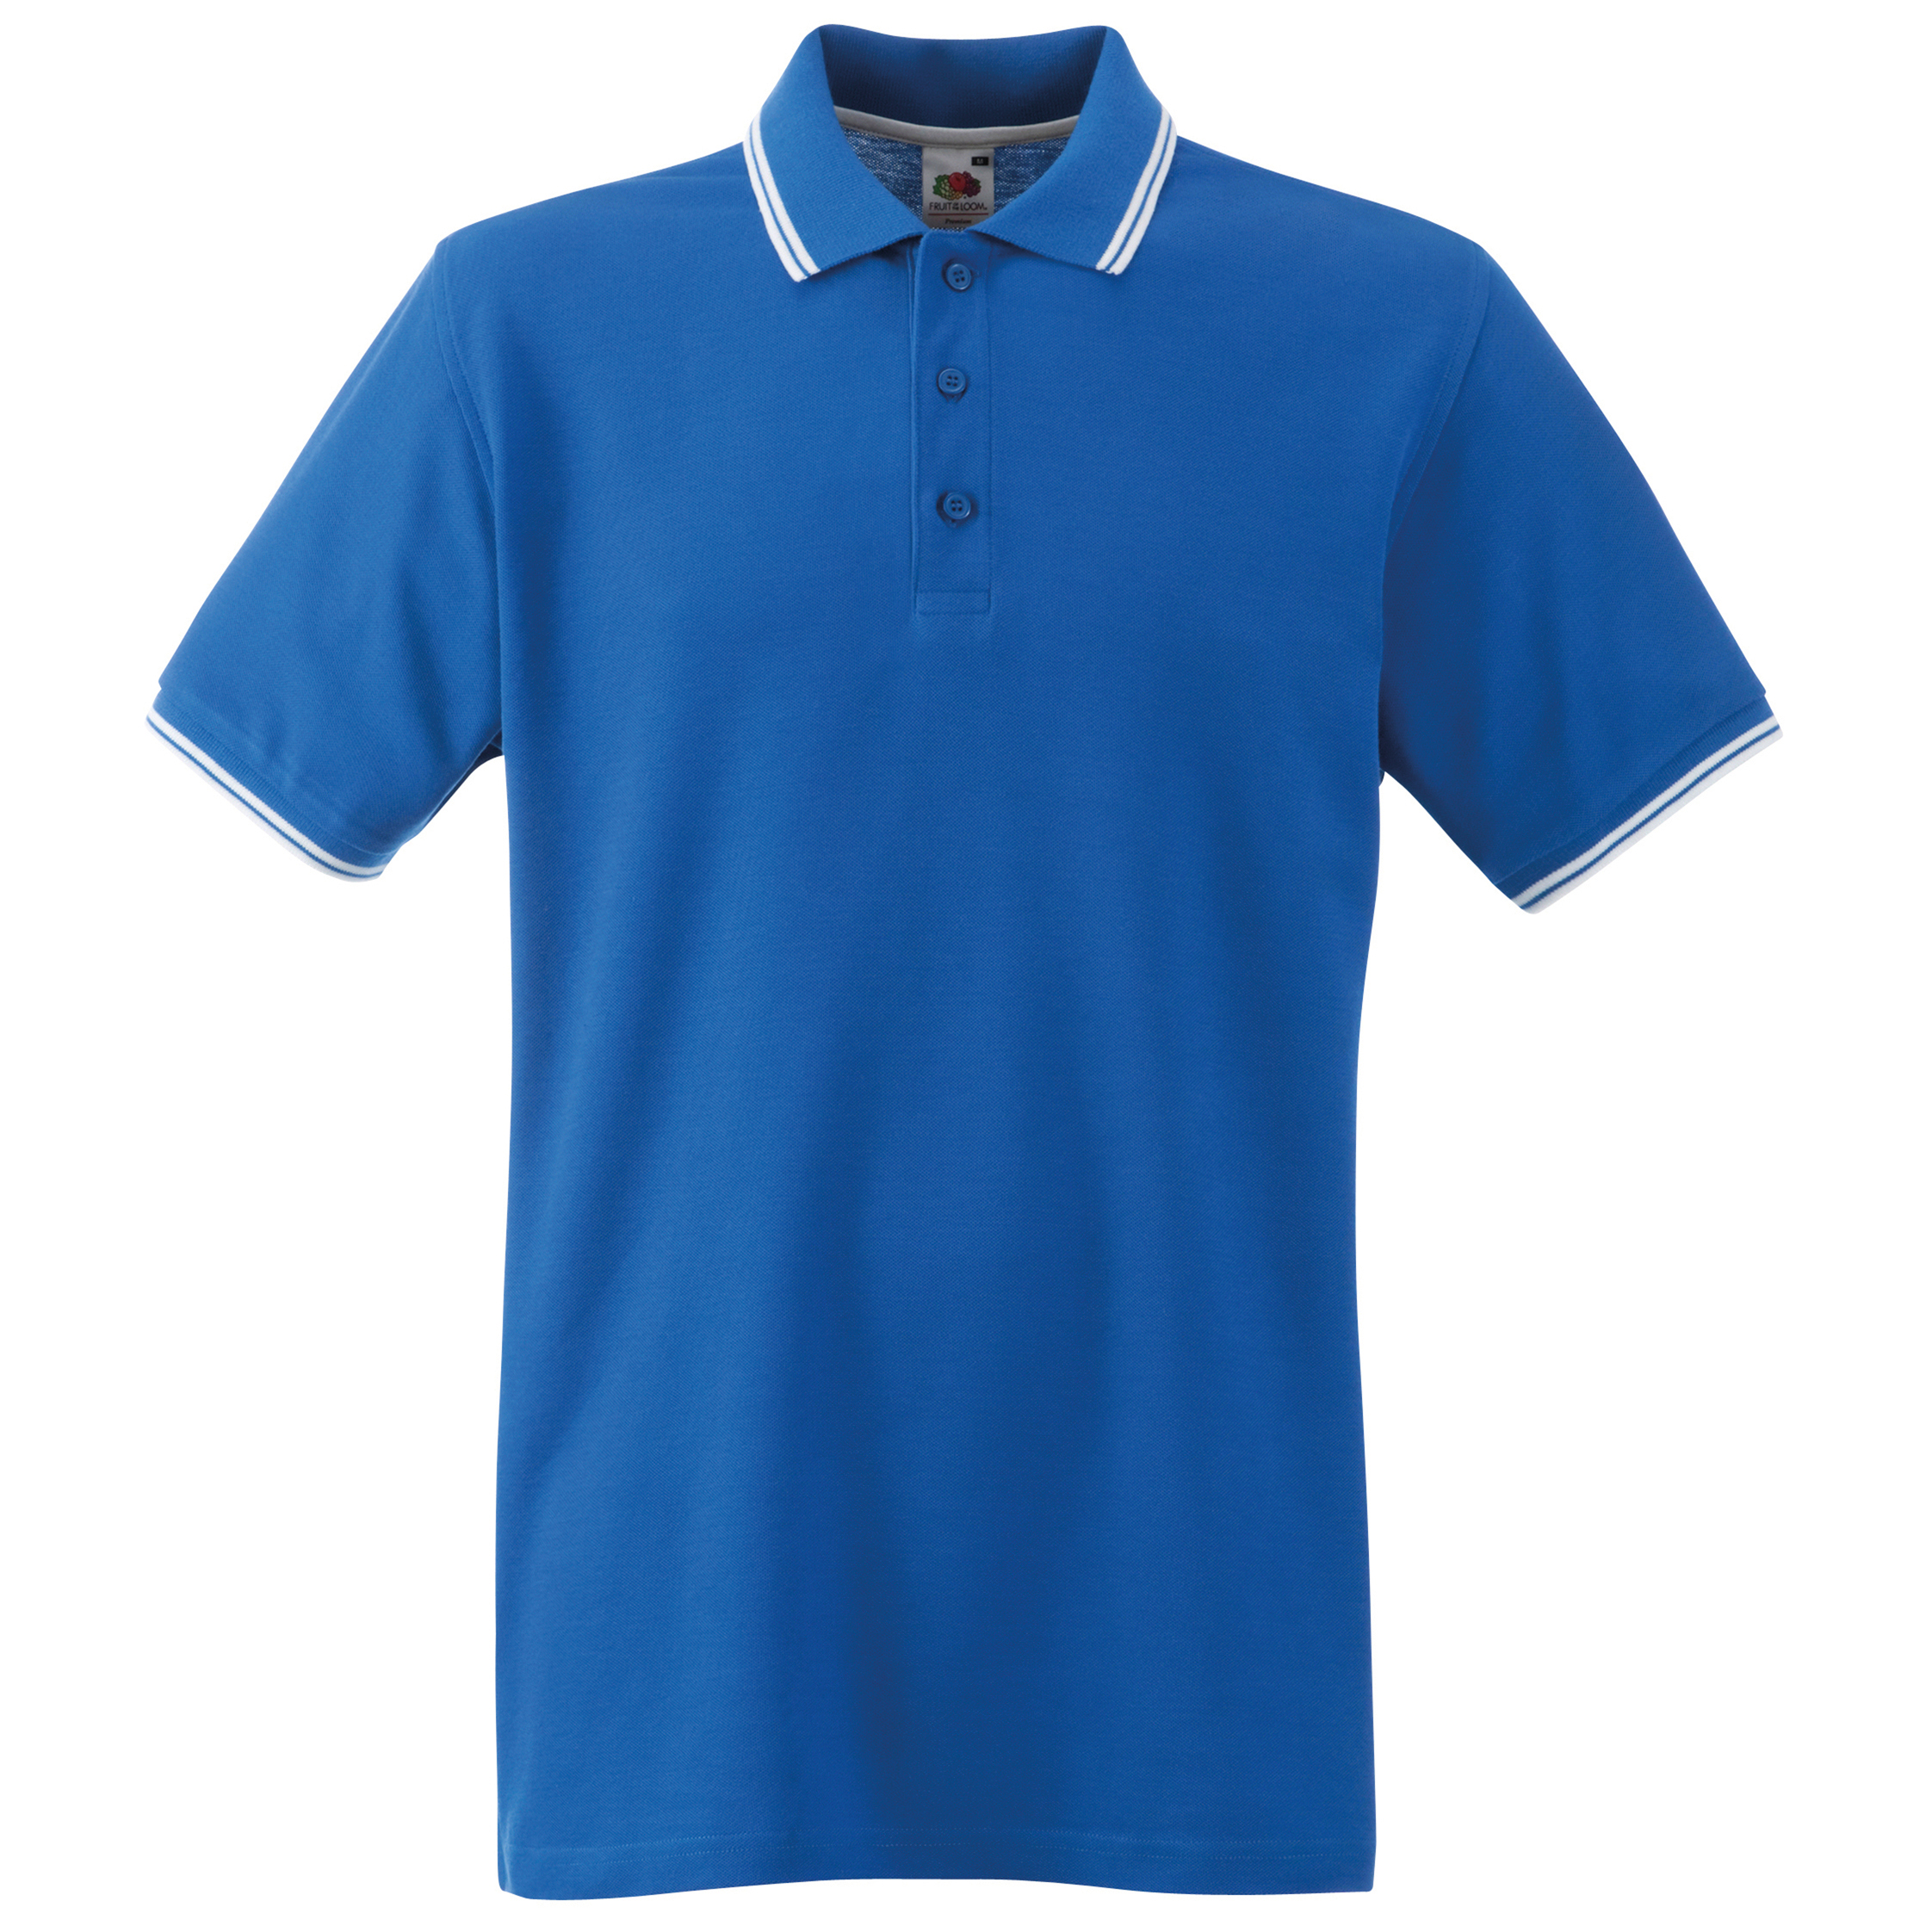 ax-httpswebsystems.s3.amazonaws.comtmp_for_downloadtipped-polo-royal-blue-white.jpg